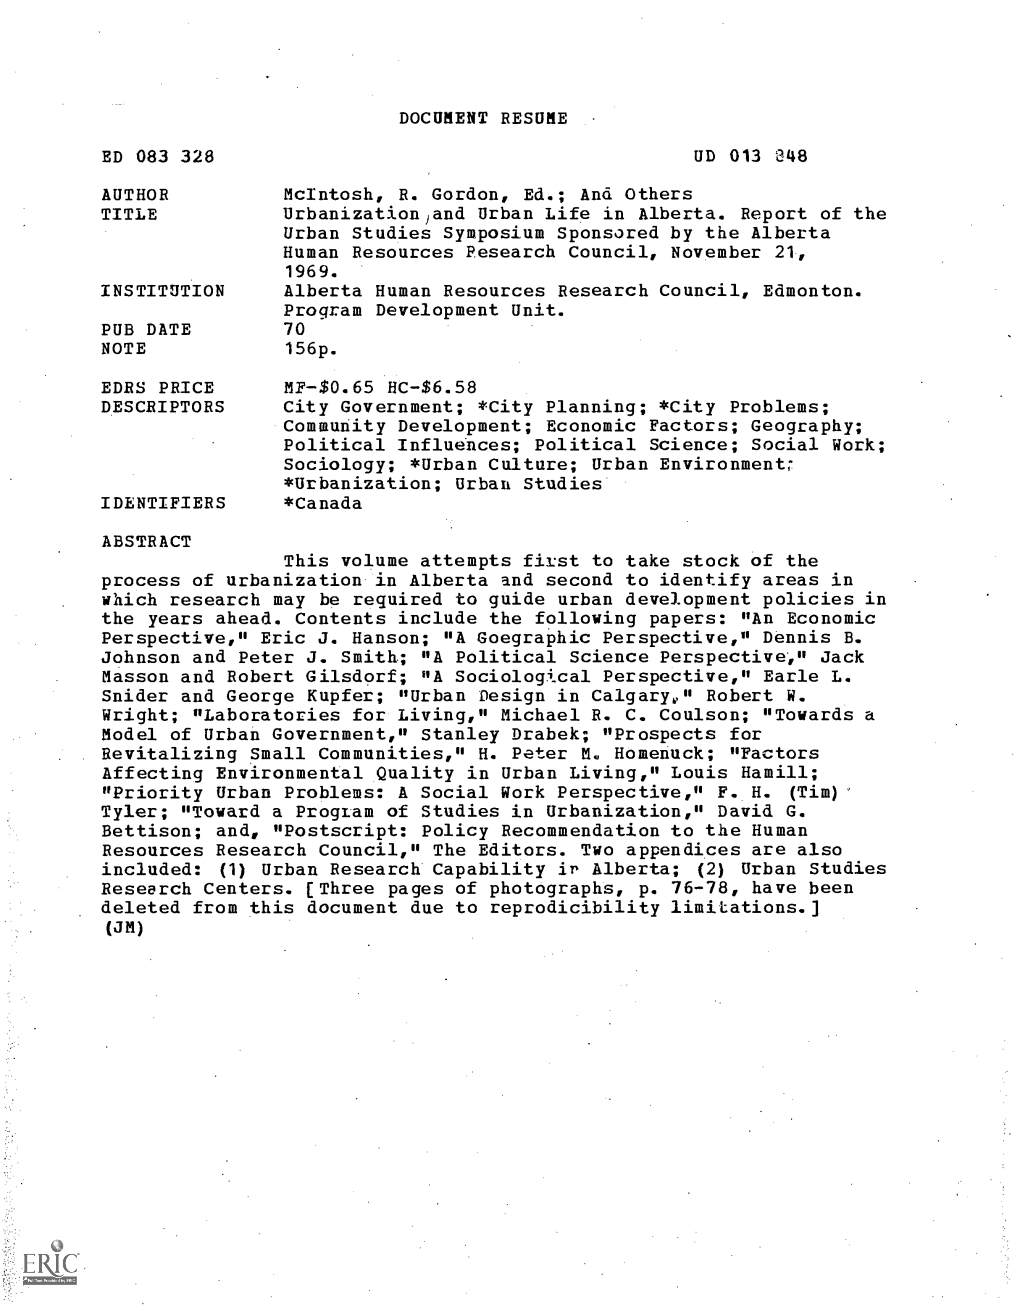 Urbanization and Urban Life in Alberta. Report of the Urban Studies Symposium Sponsored by the Alberta Human Resources Research Council, November 21, 1969